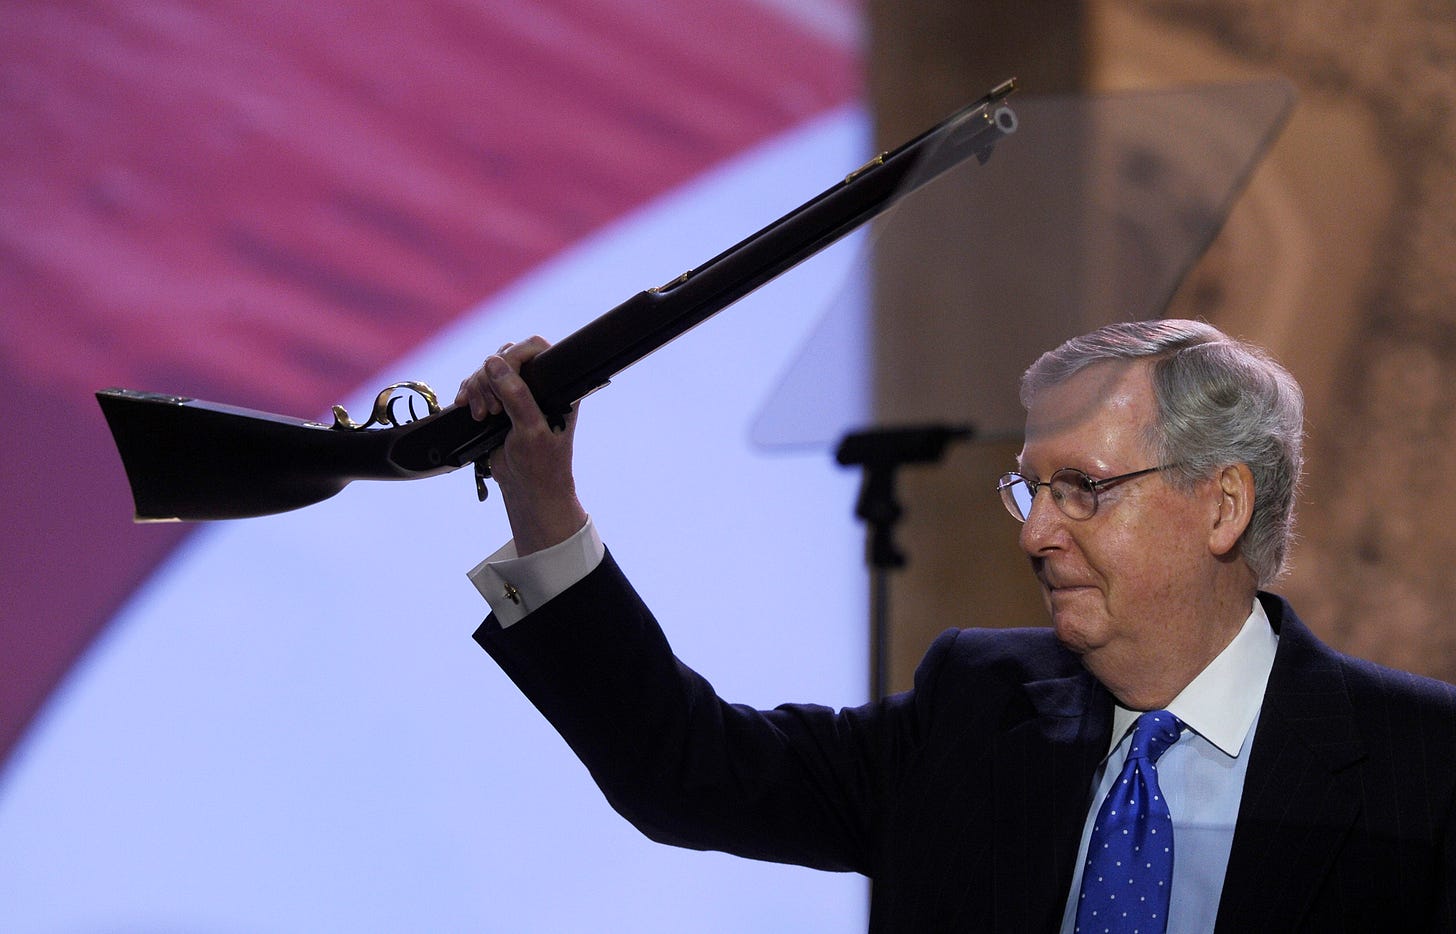 McConnell has a long history of opposing gun legislation in the wake of  tragedies